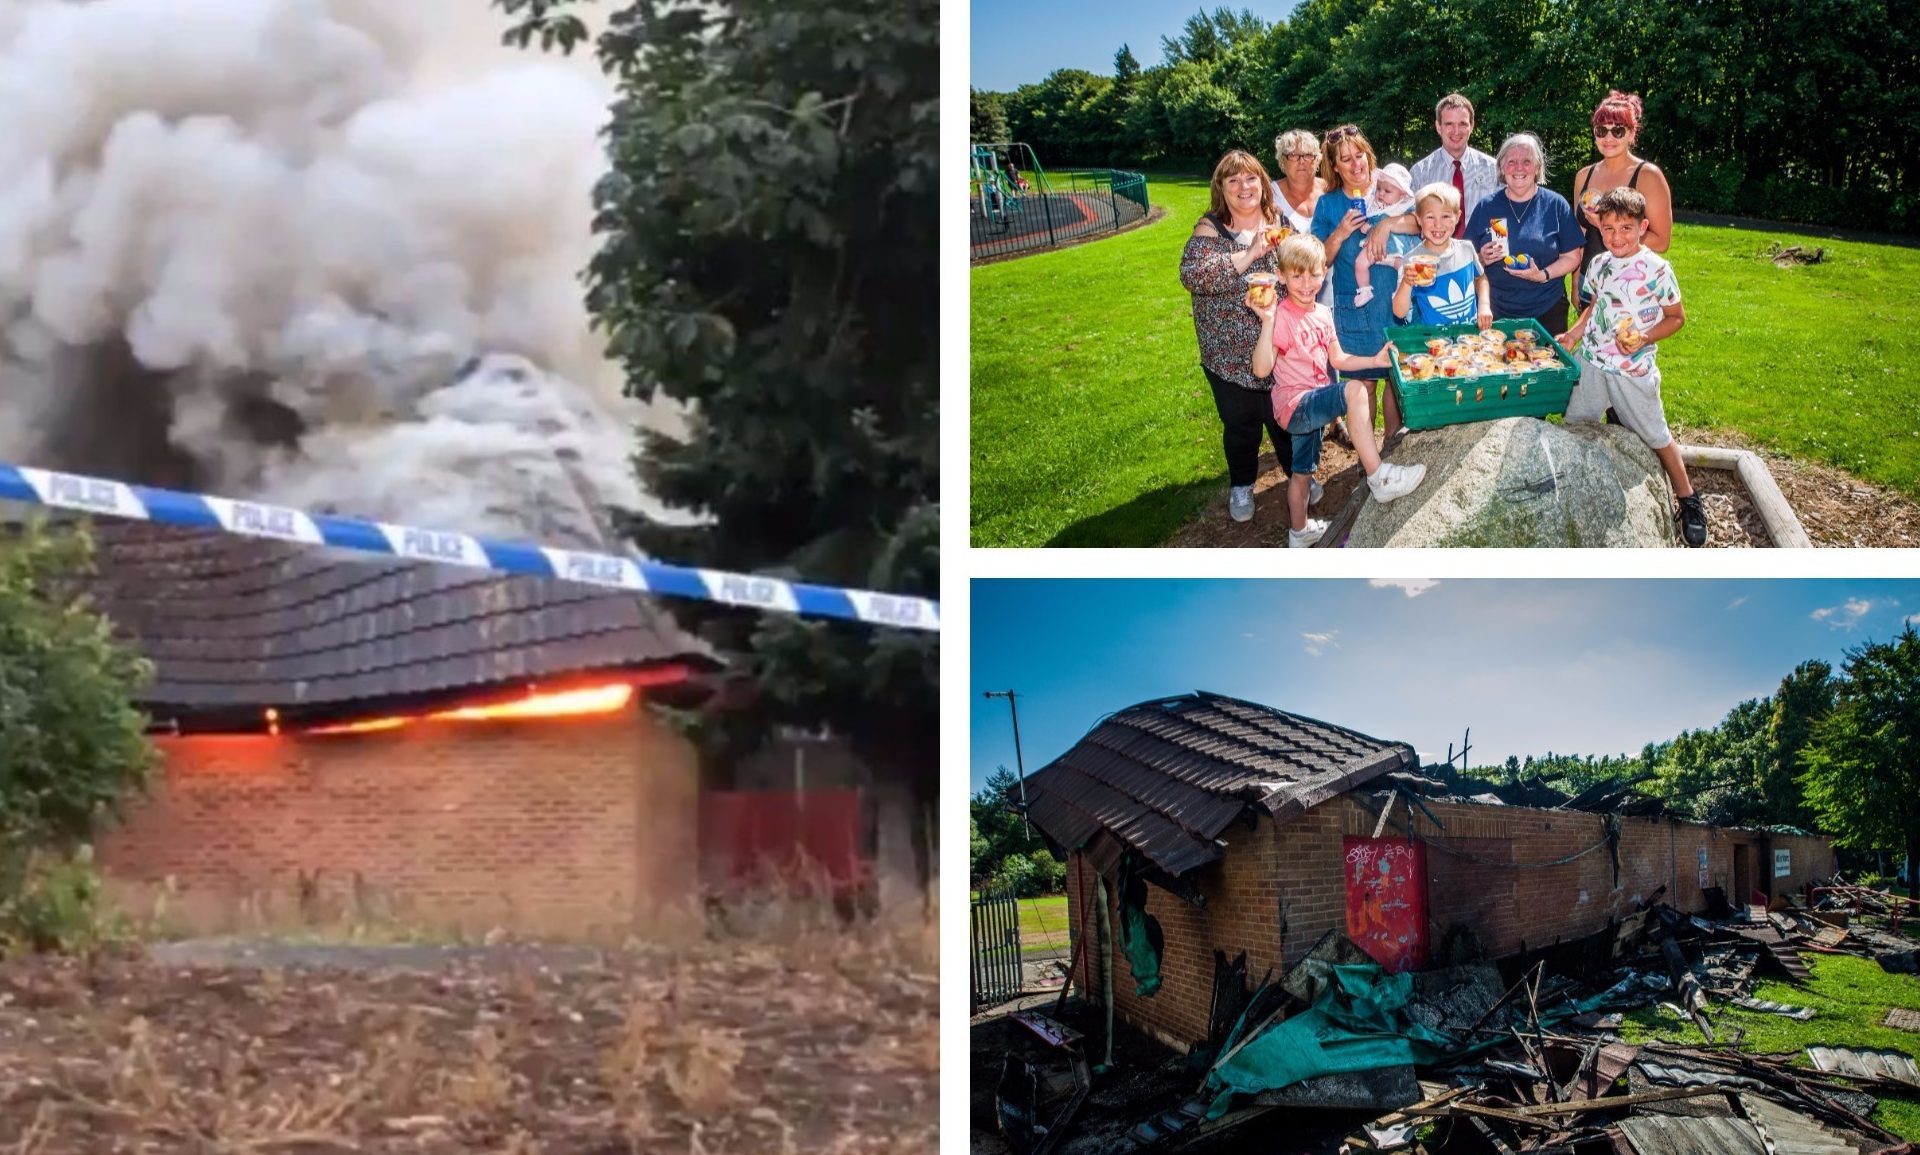 Mill O' Mains Community Pavilion was destroyed in the blaze.